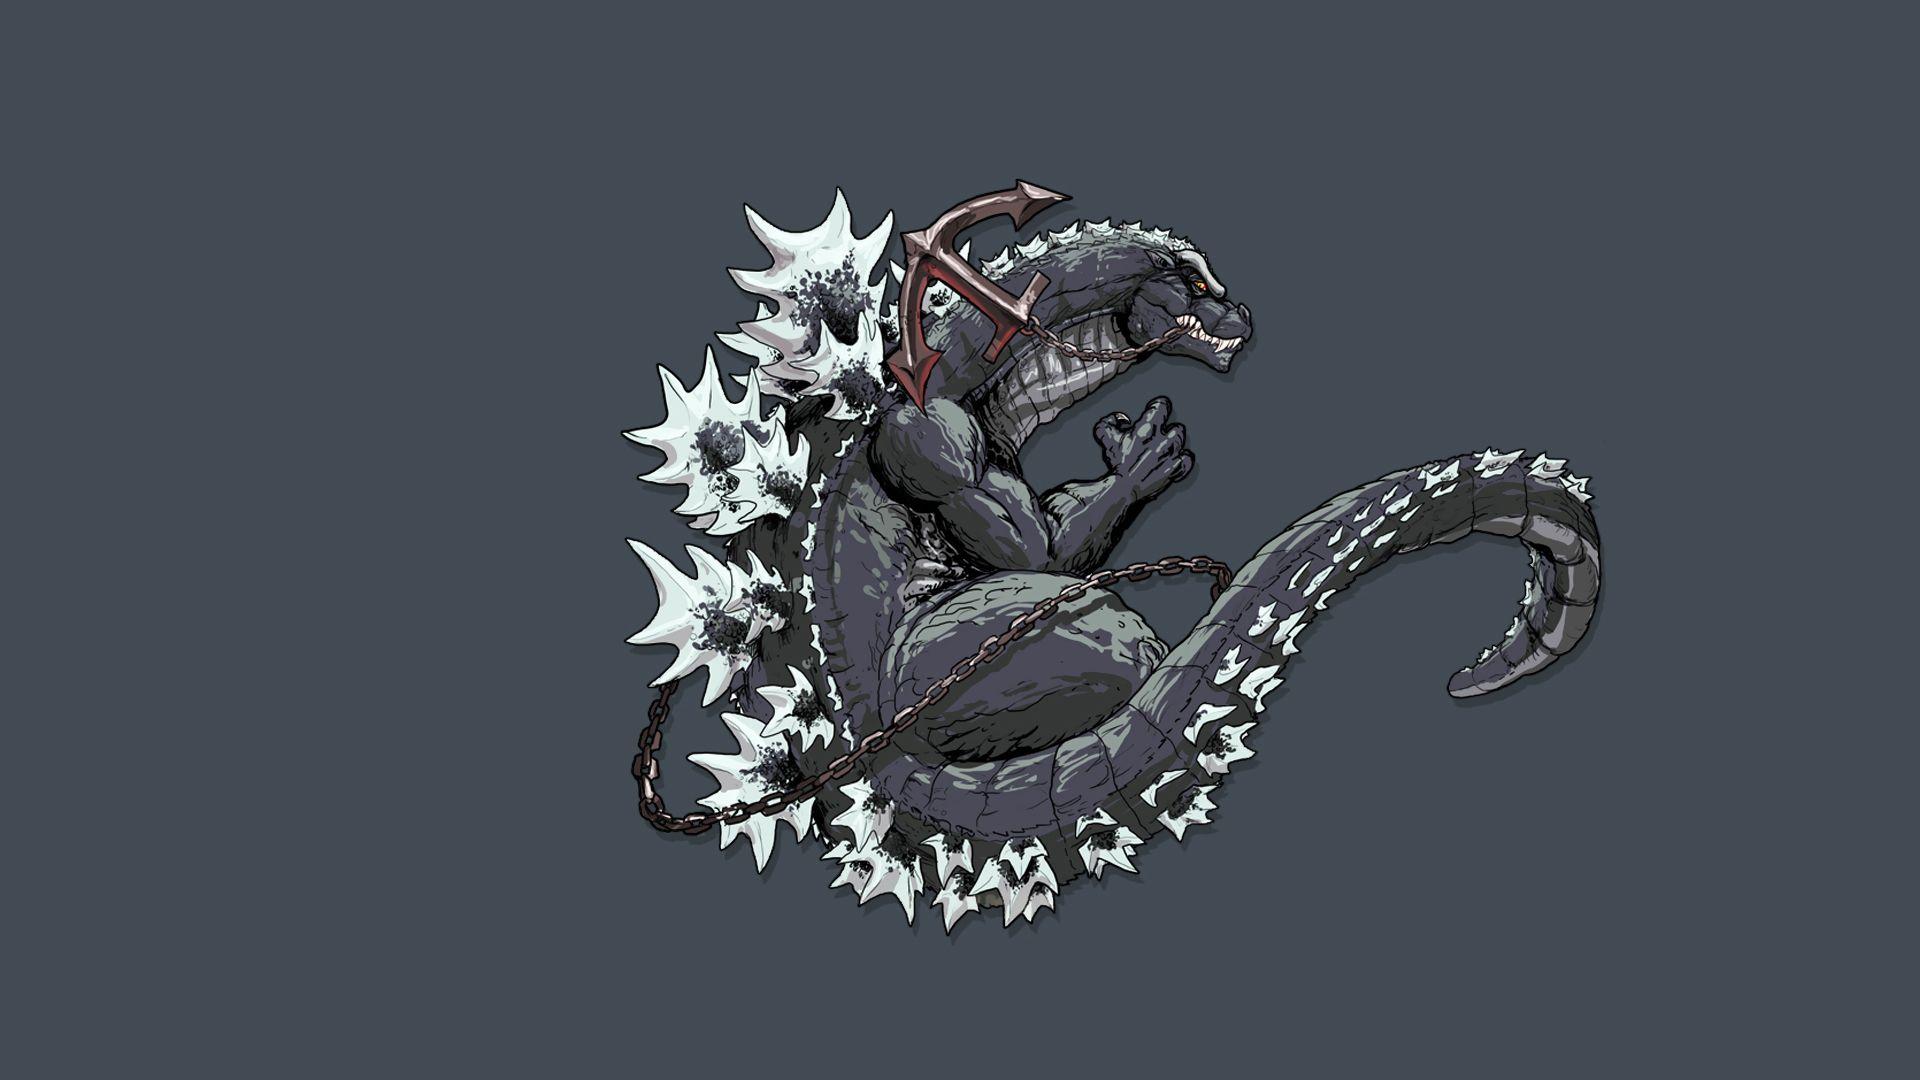 Download Godzilla Wallpaper for android, Godzilla Wallpaper Godzilla